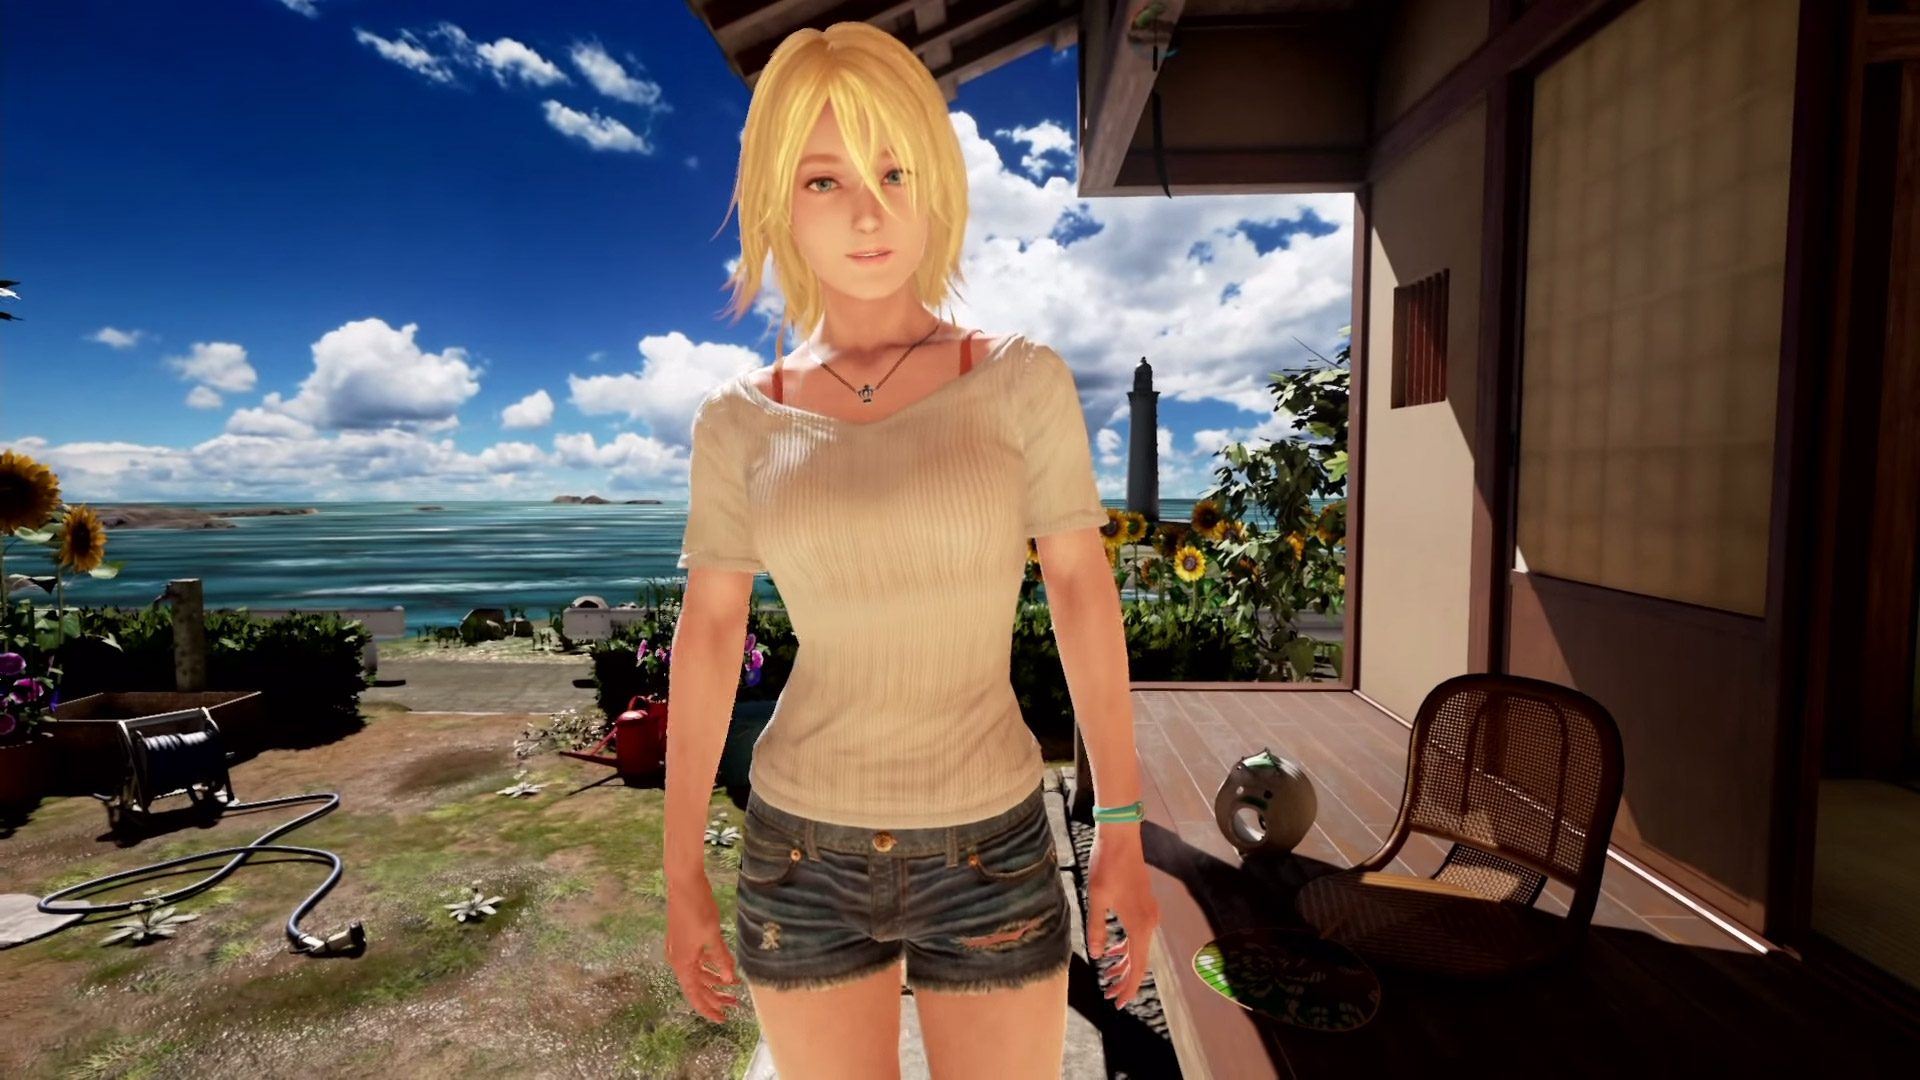 when will summer lesson vr release in us?